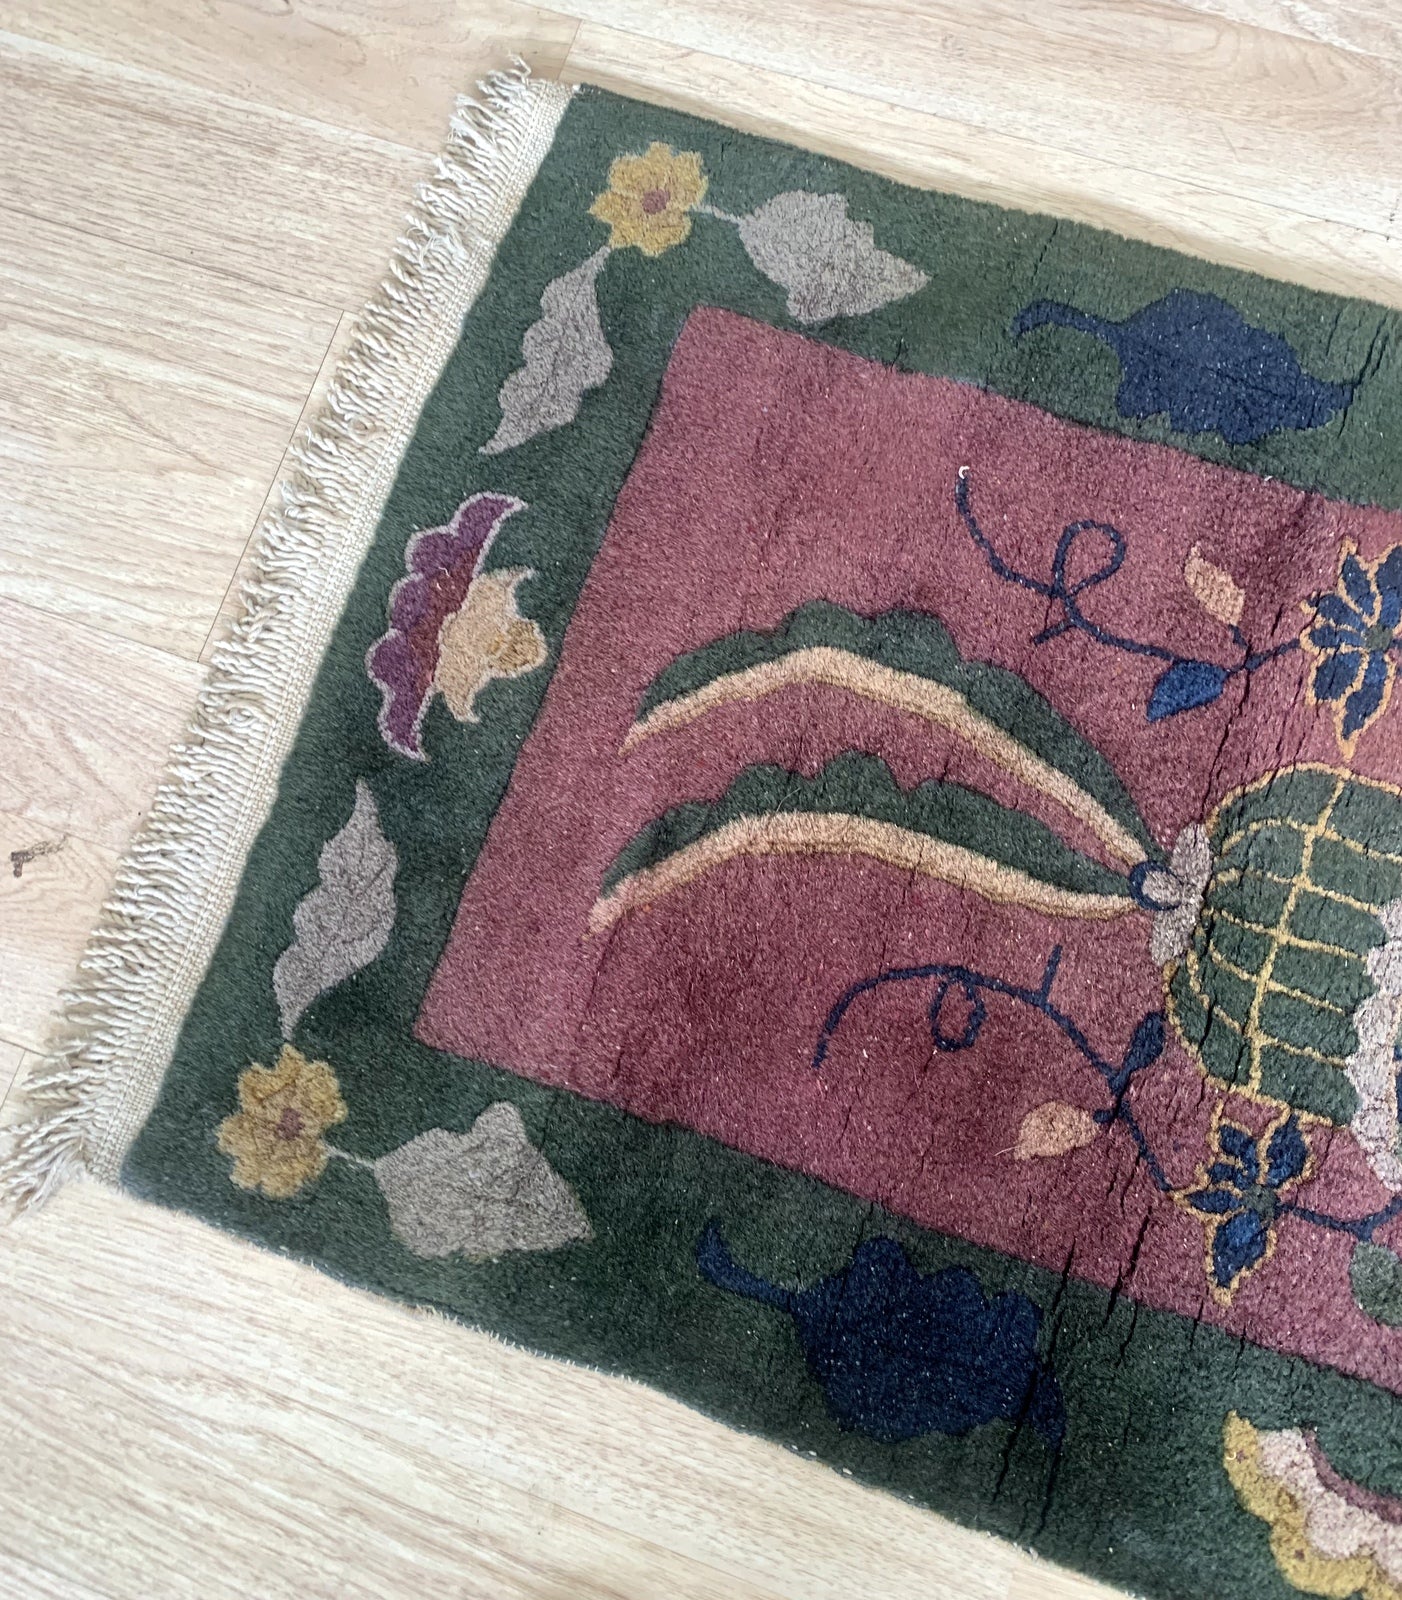 Fine wool material used in the handmade rug